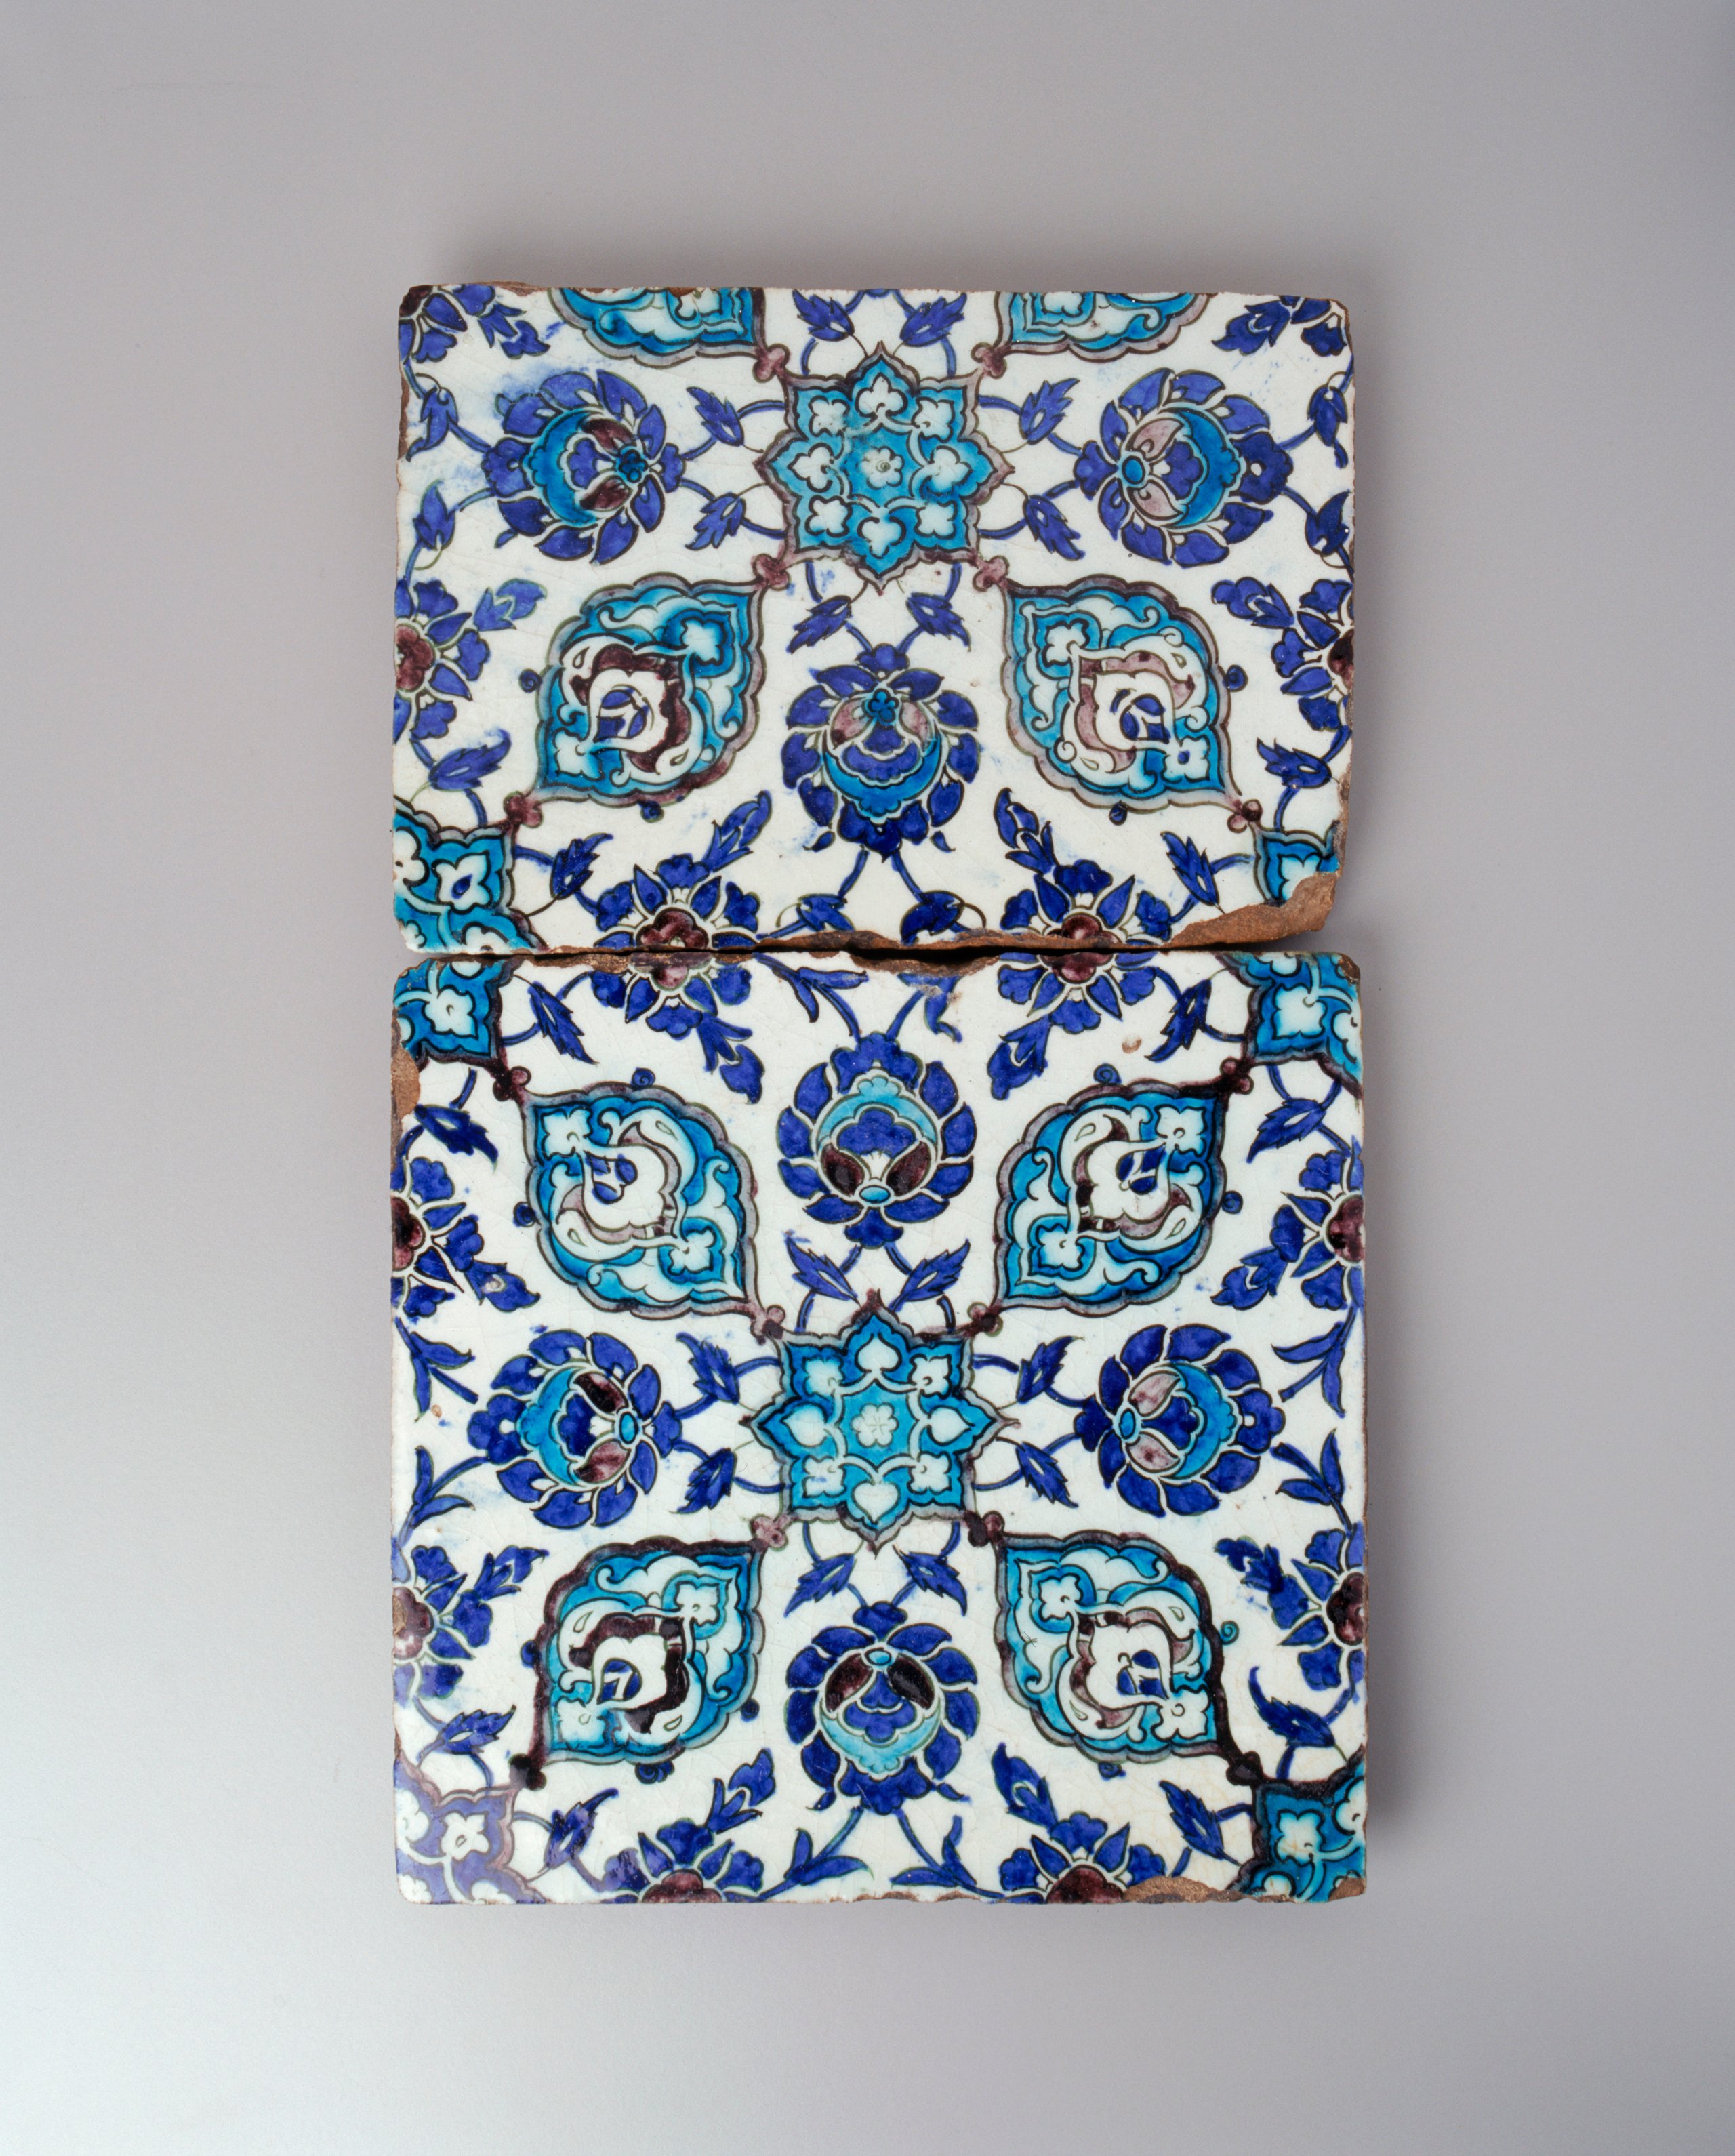 A pair of earthenware tiles from Damascus, Syria